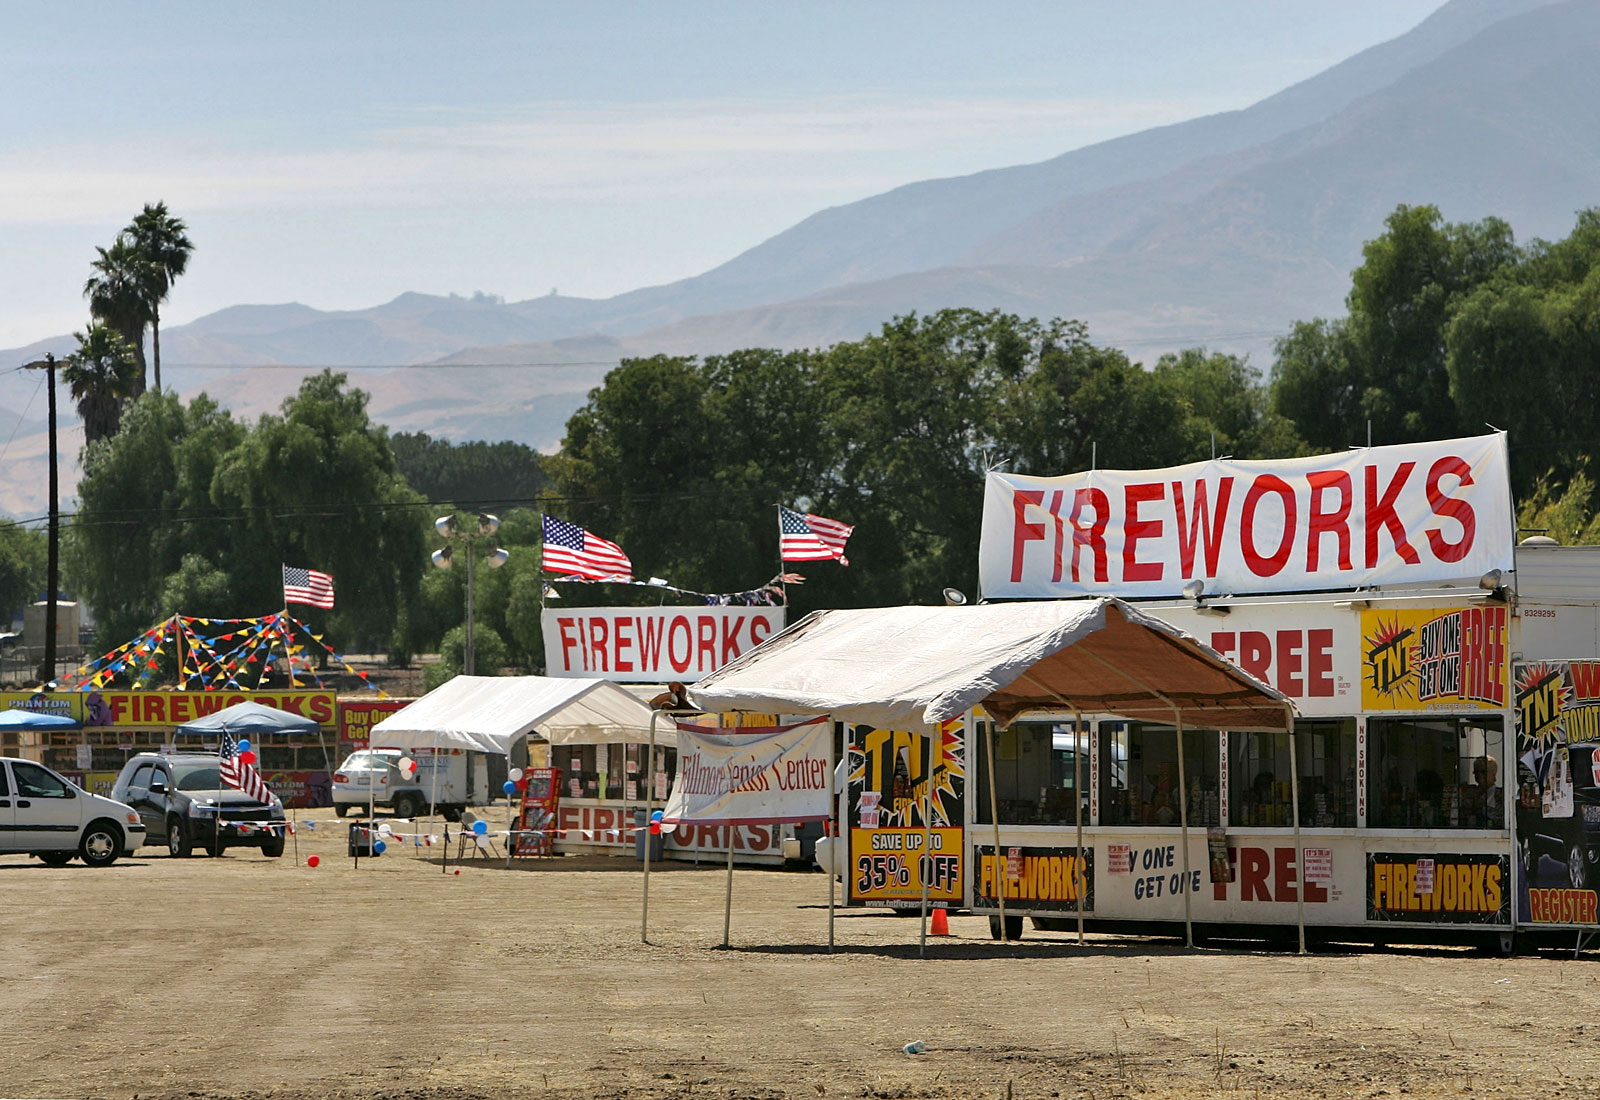 Fireworks being sold in California during a drought